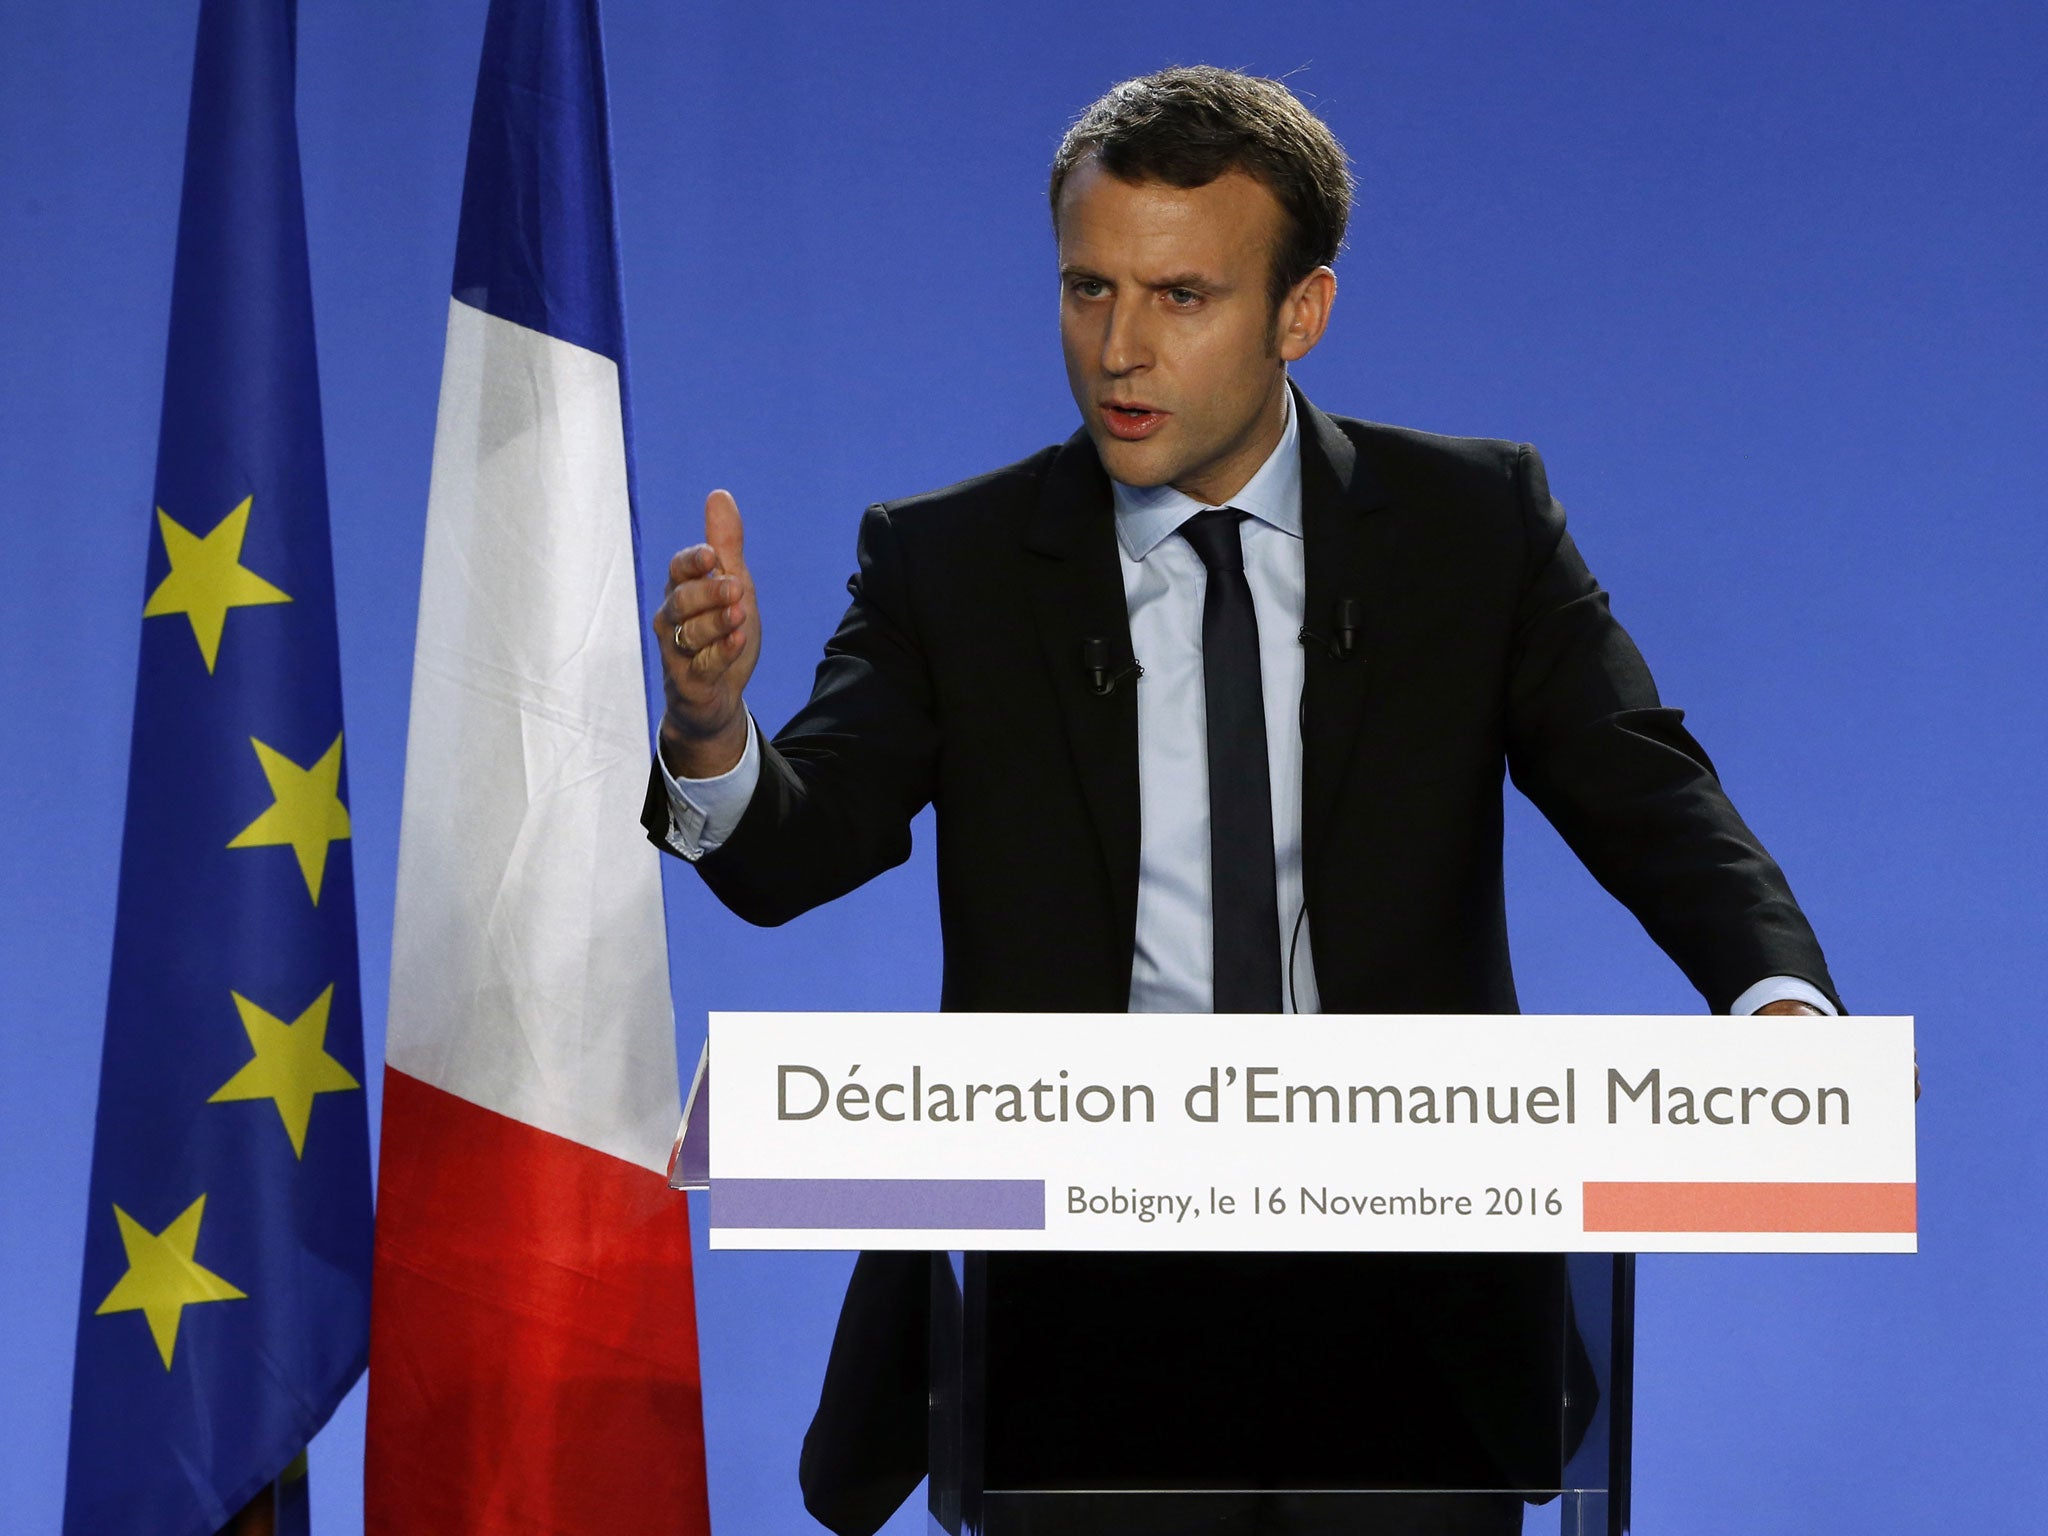 Emmanuel Macron started his own political movement in April